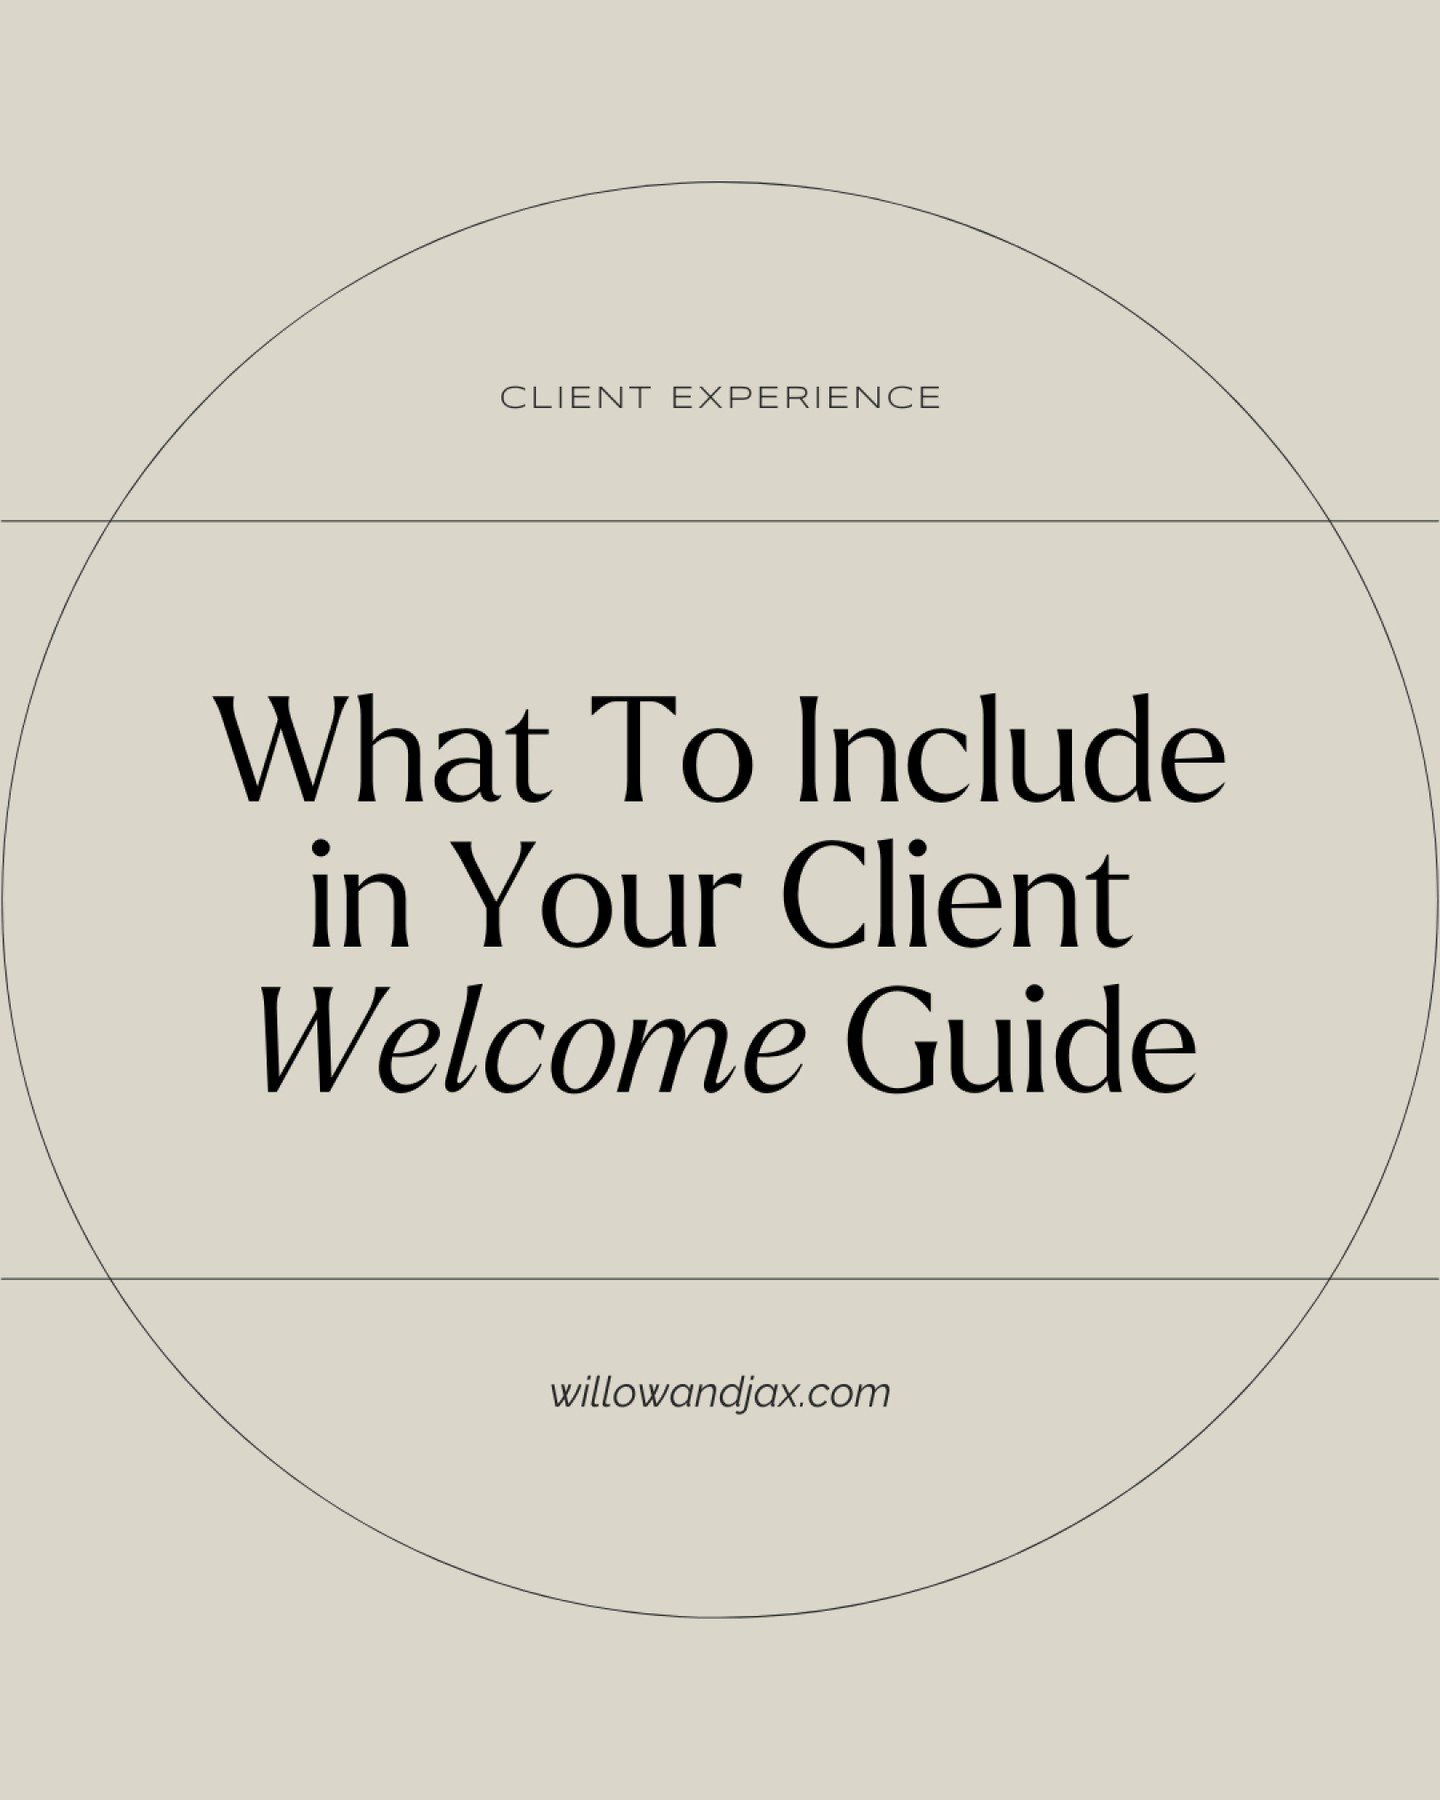 Are you looking to improve your client experience? Look no further than your onboarding process! As a designer, it's important to start off on the right foot with your new clients. A great way to do this is by creating a Client Welcome Guide.

This g